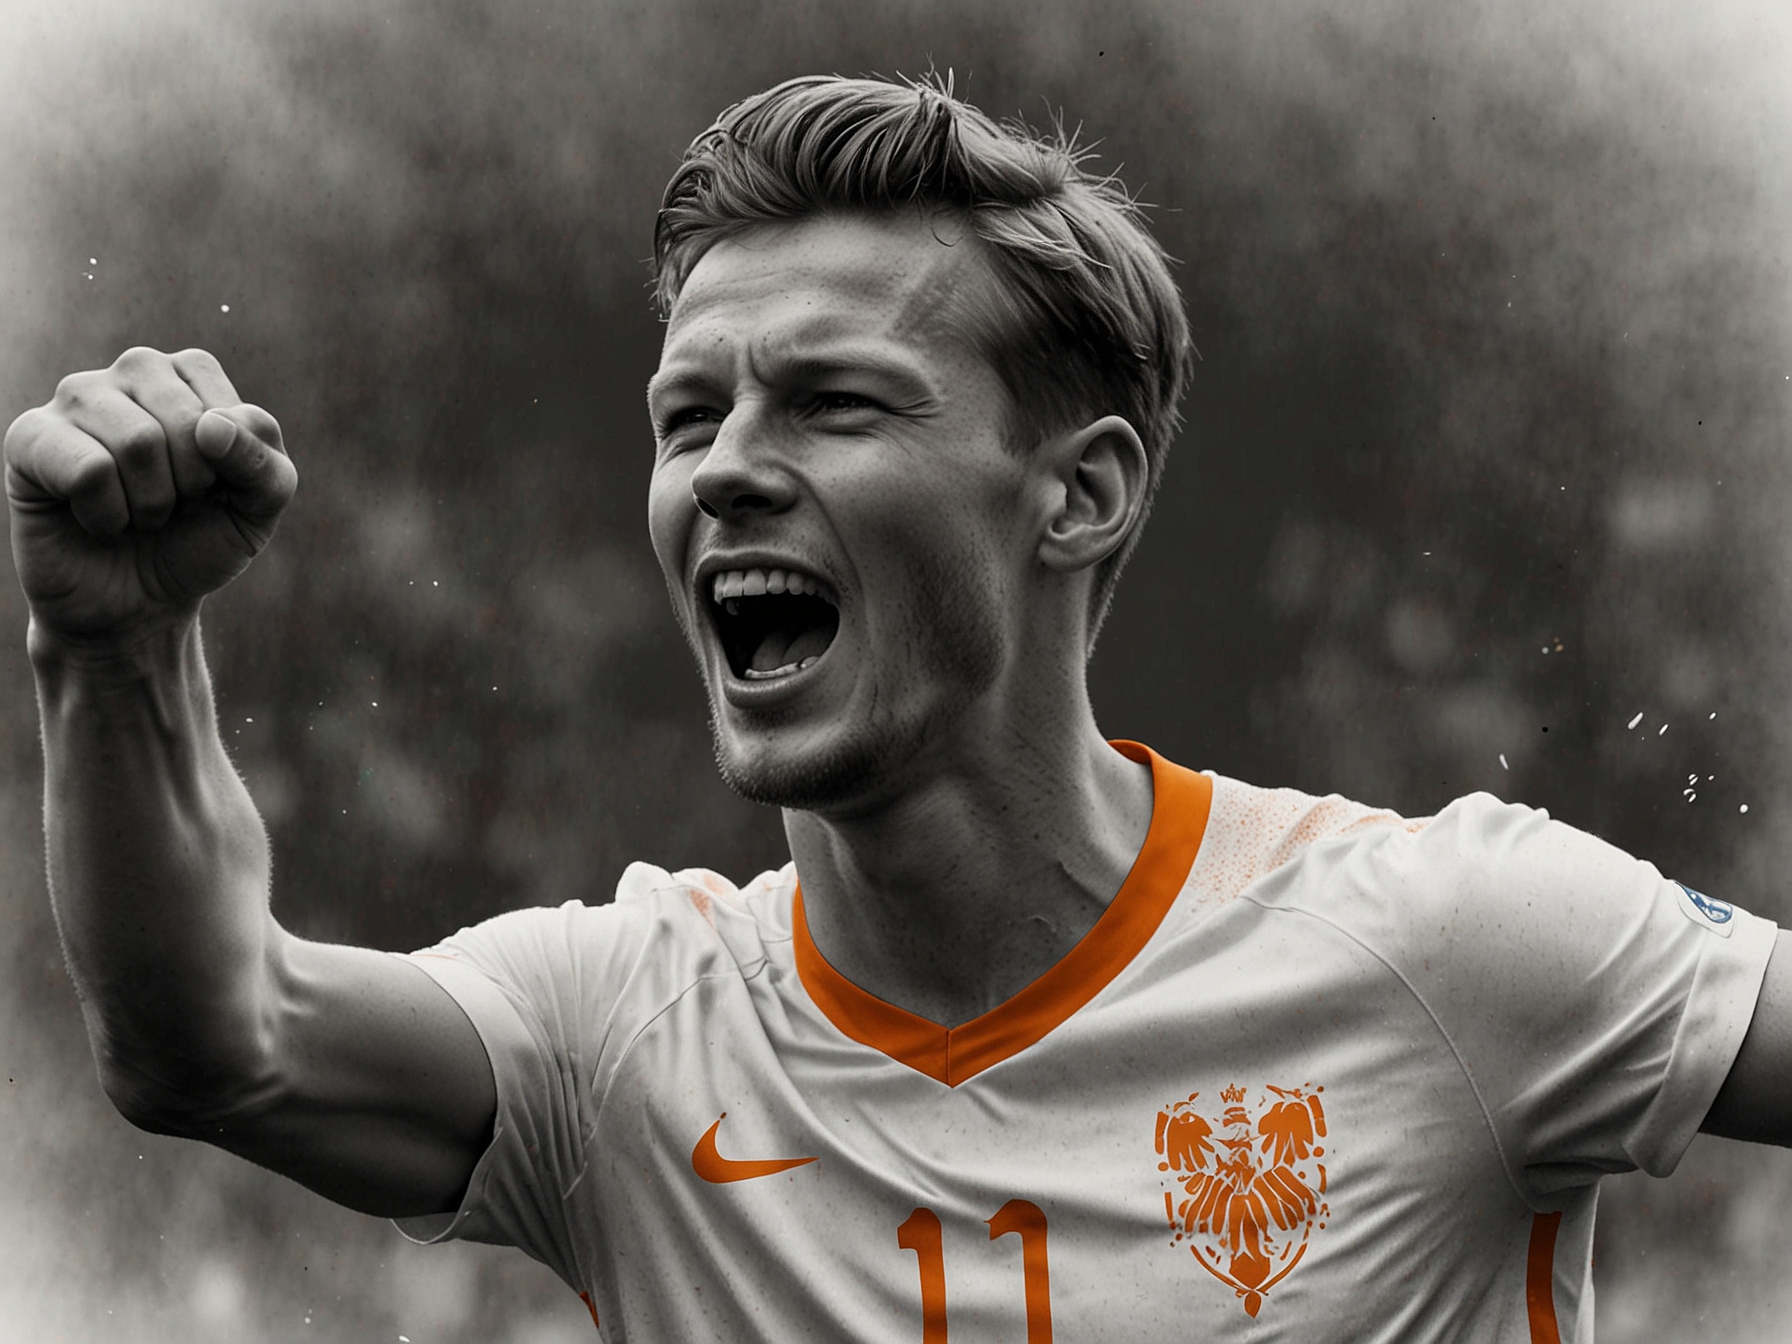 Wout Weghorst celebrates his first-touch goal that secured the Netherlands' 2-1 victory over Poland in the Euro 2024 Group D opener, showcasing his immediate impact and the team's depth.